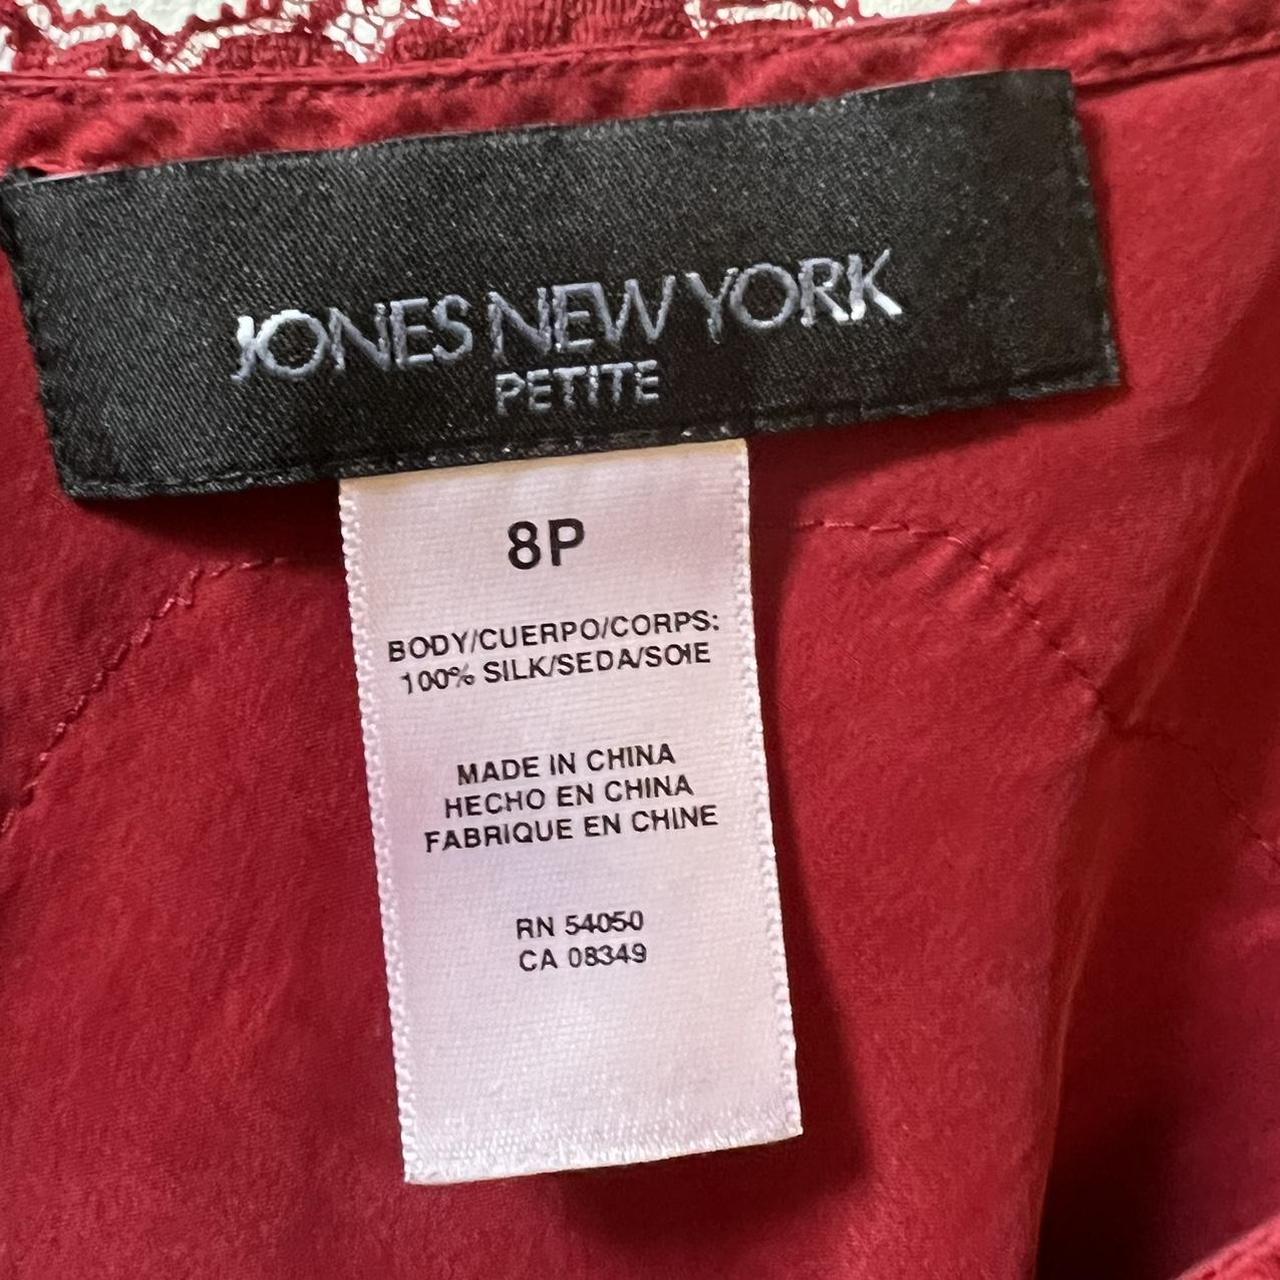 jones new york gorgeous red top size 8p fits like a... - Depop